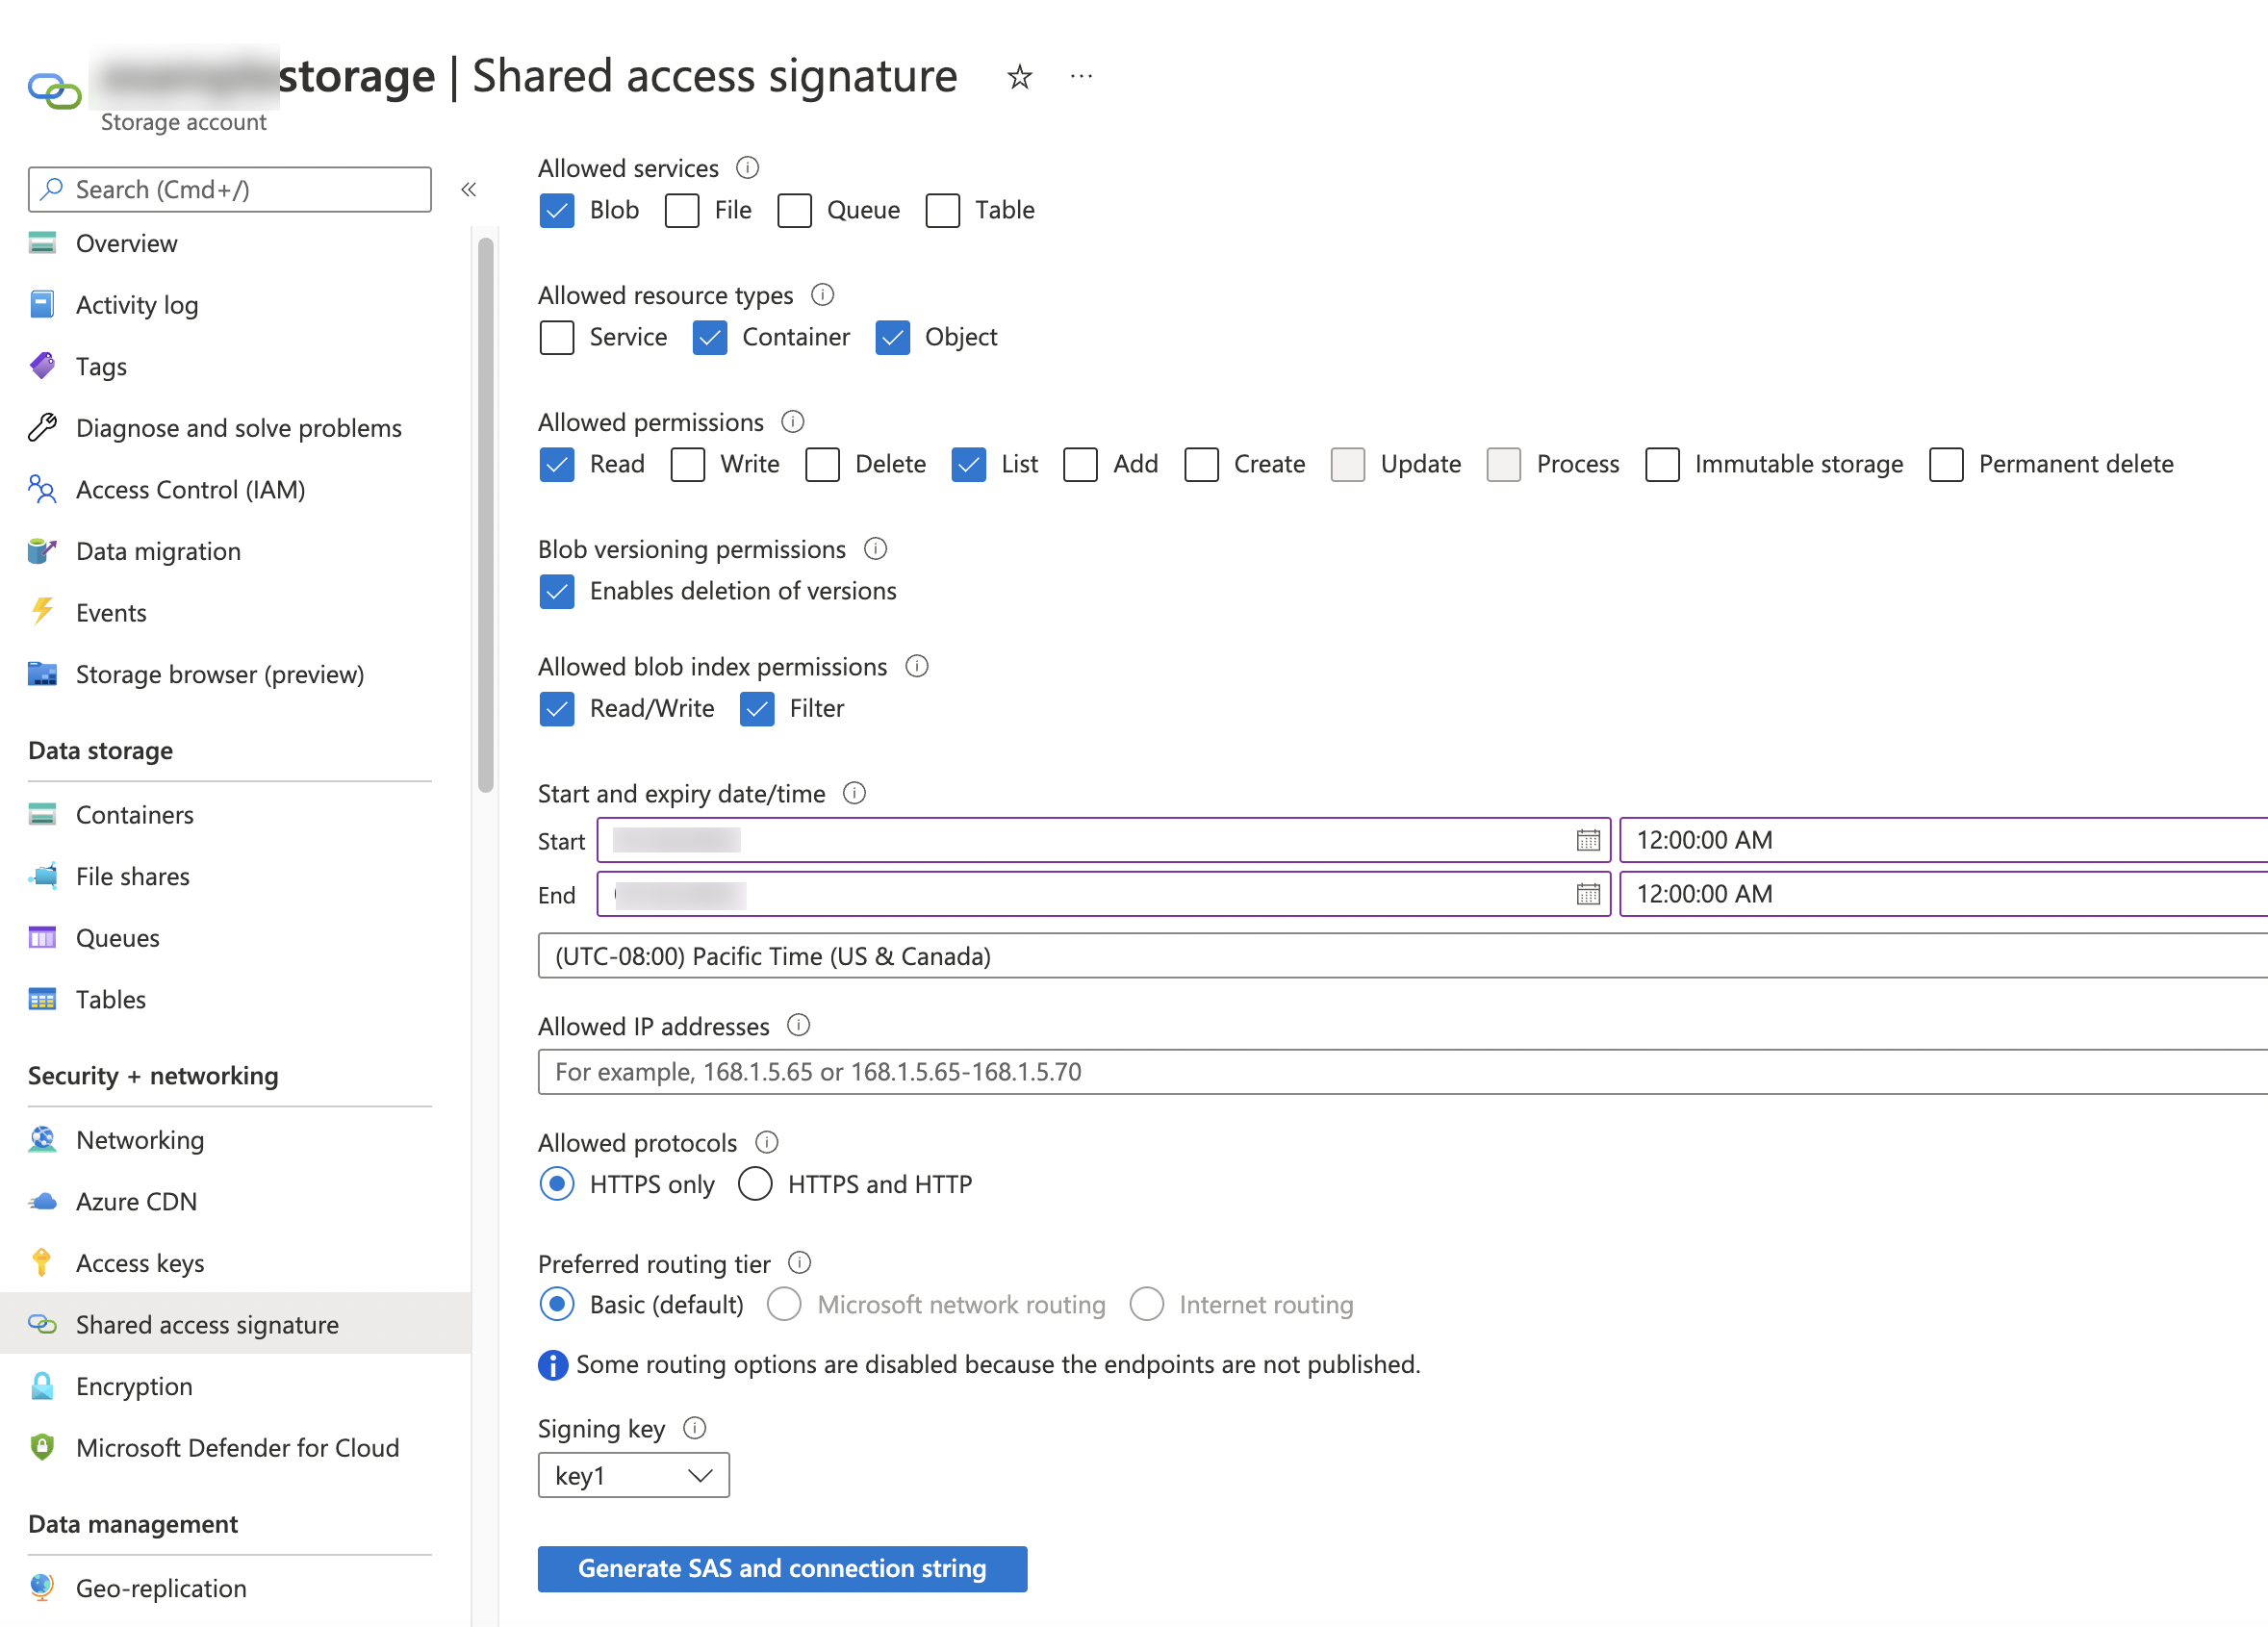 Shared Access Signature Details in Azure Storage Console